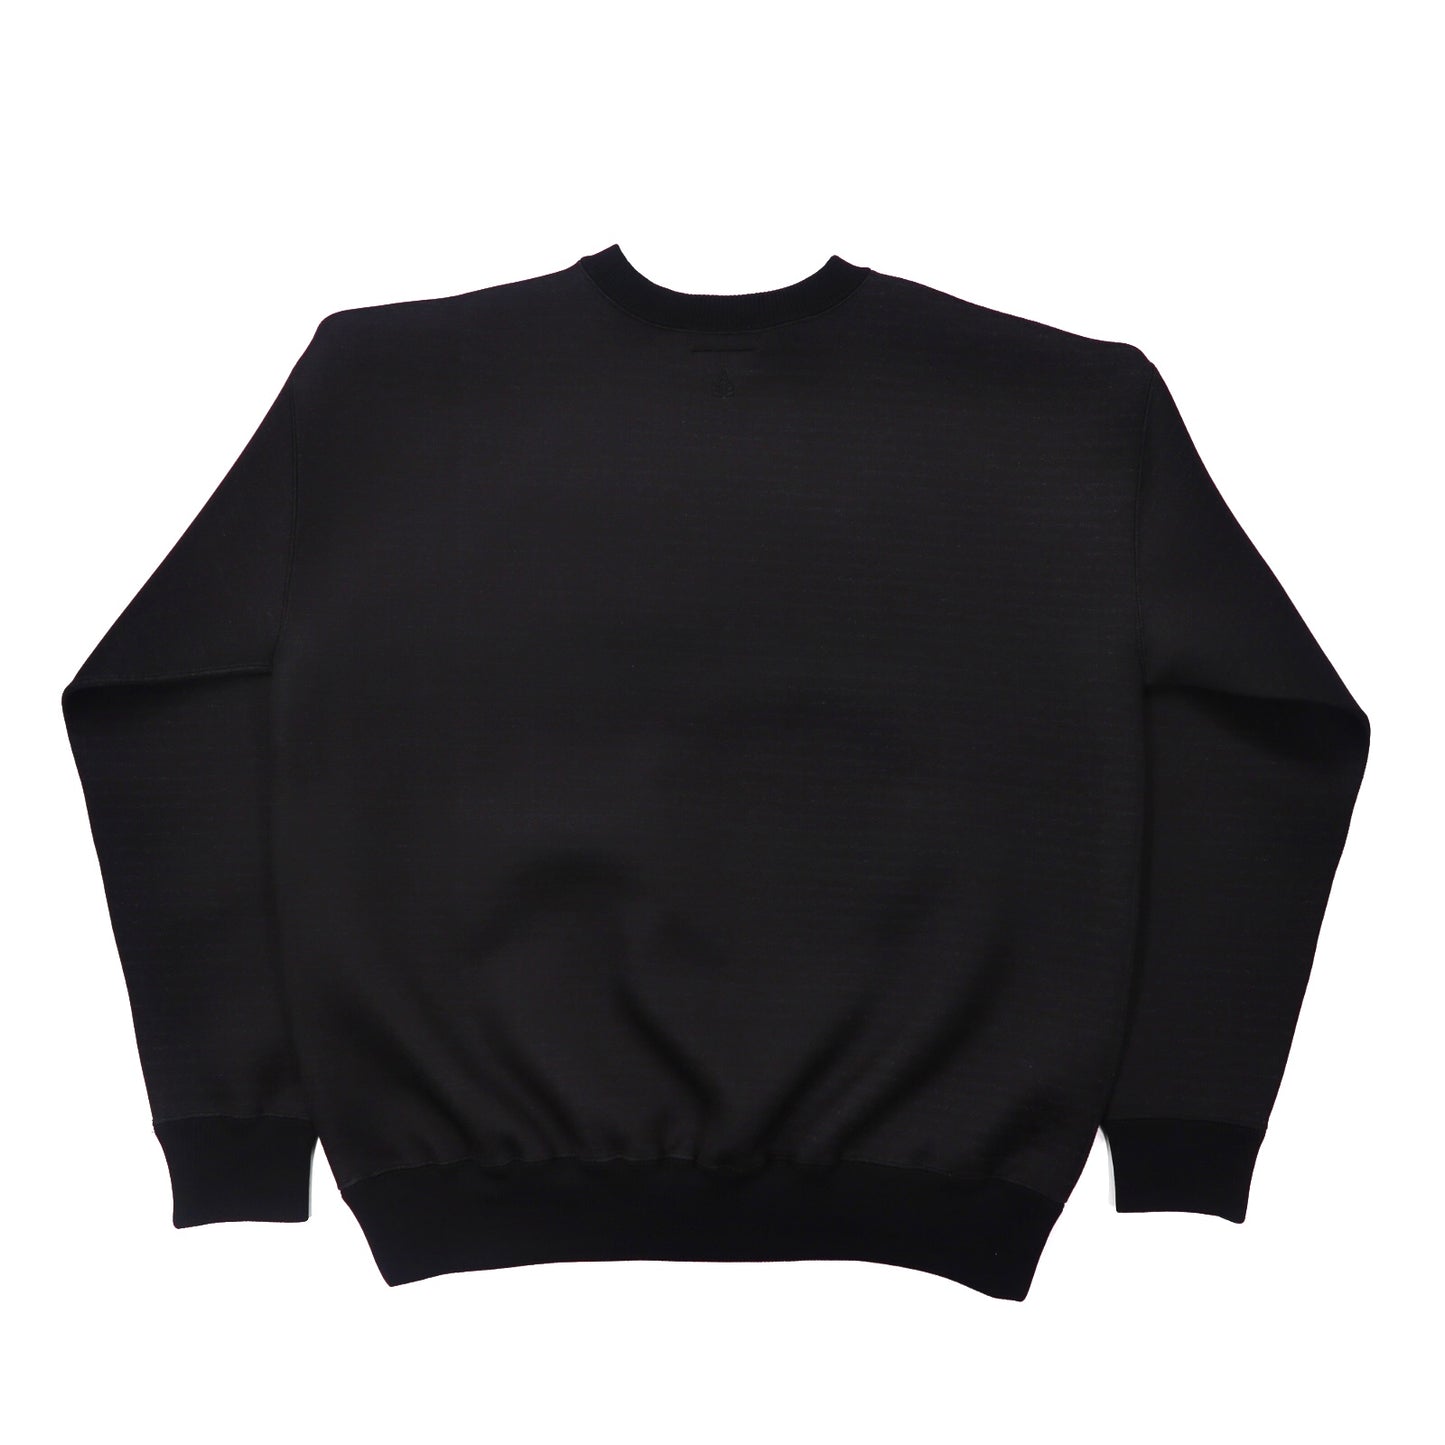 WIND AND SEA Crew Neck Sweatshirt S Black WDS-20A-TPS-04 – 日本然